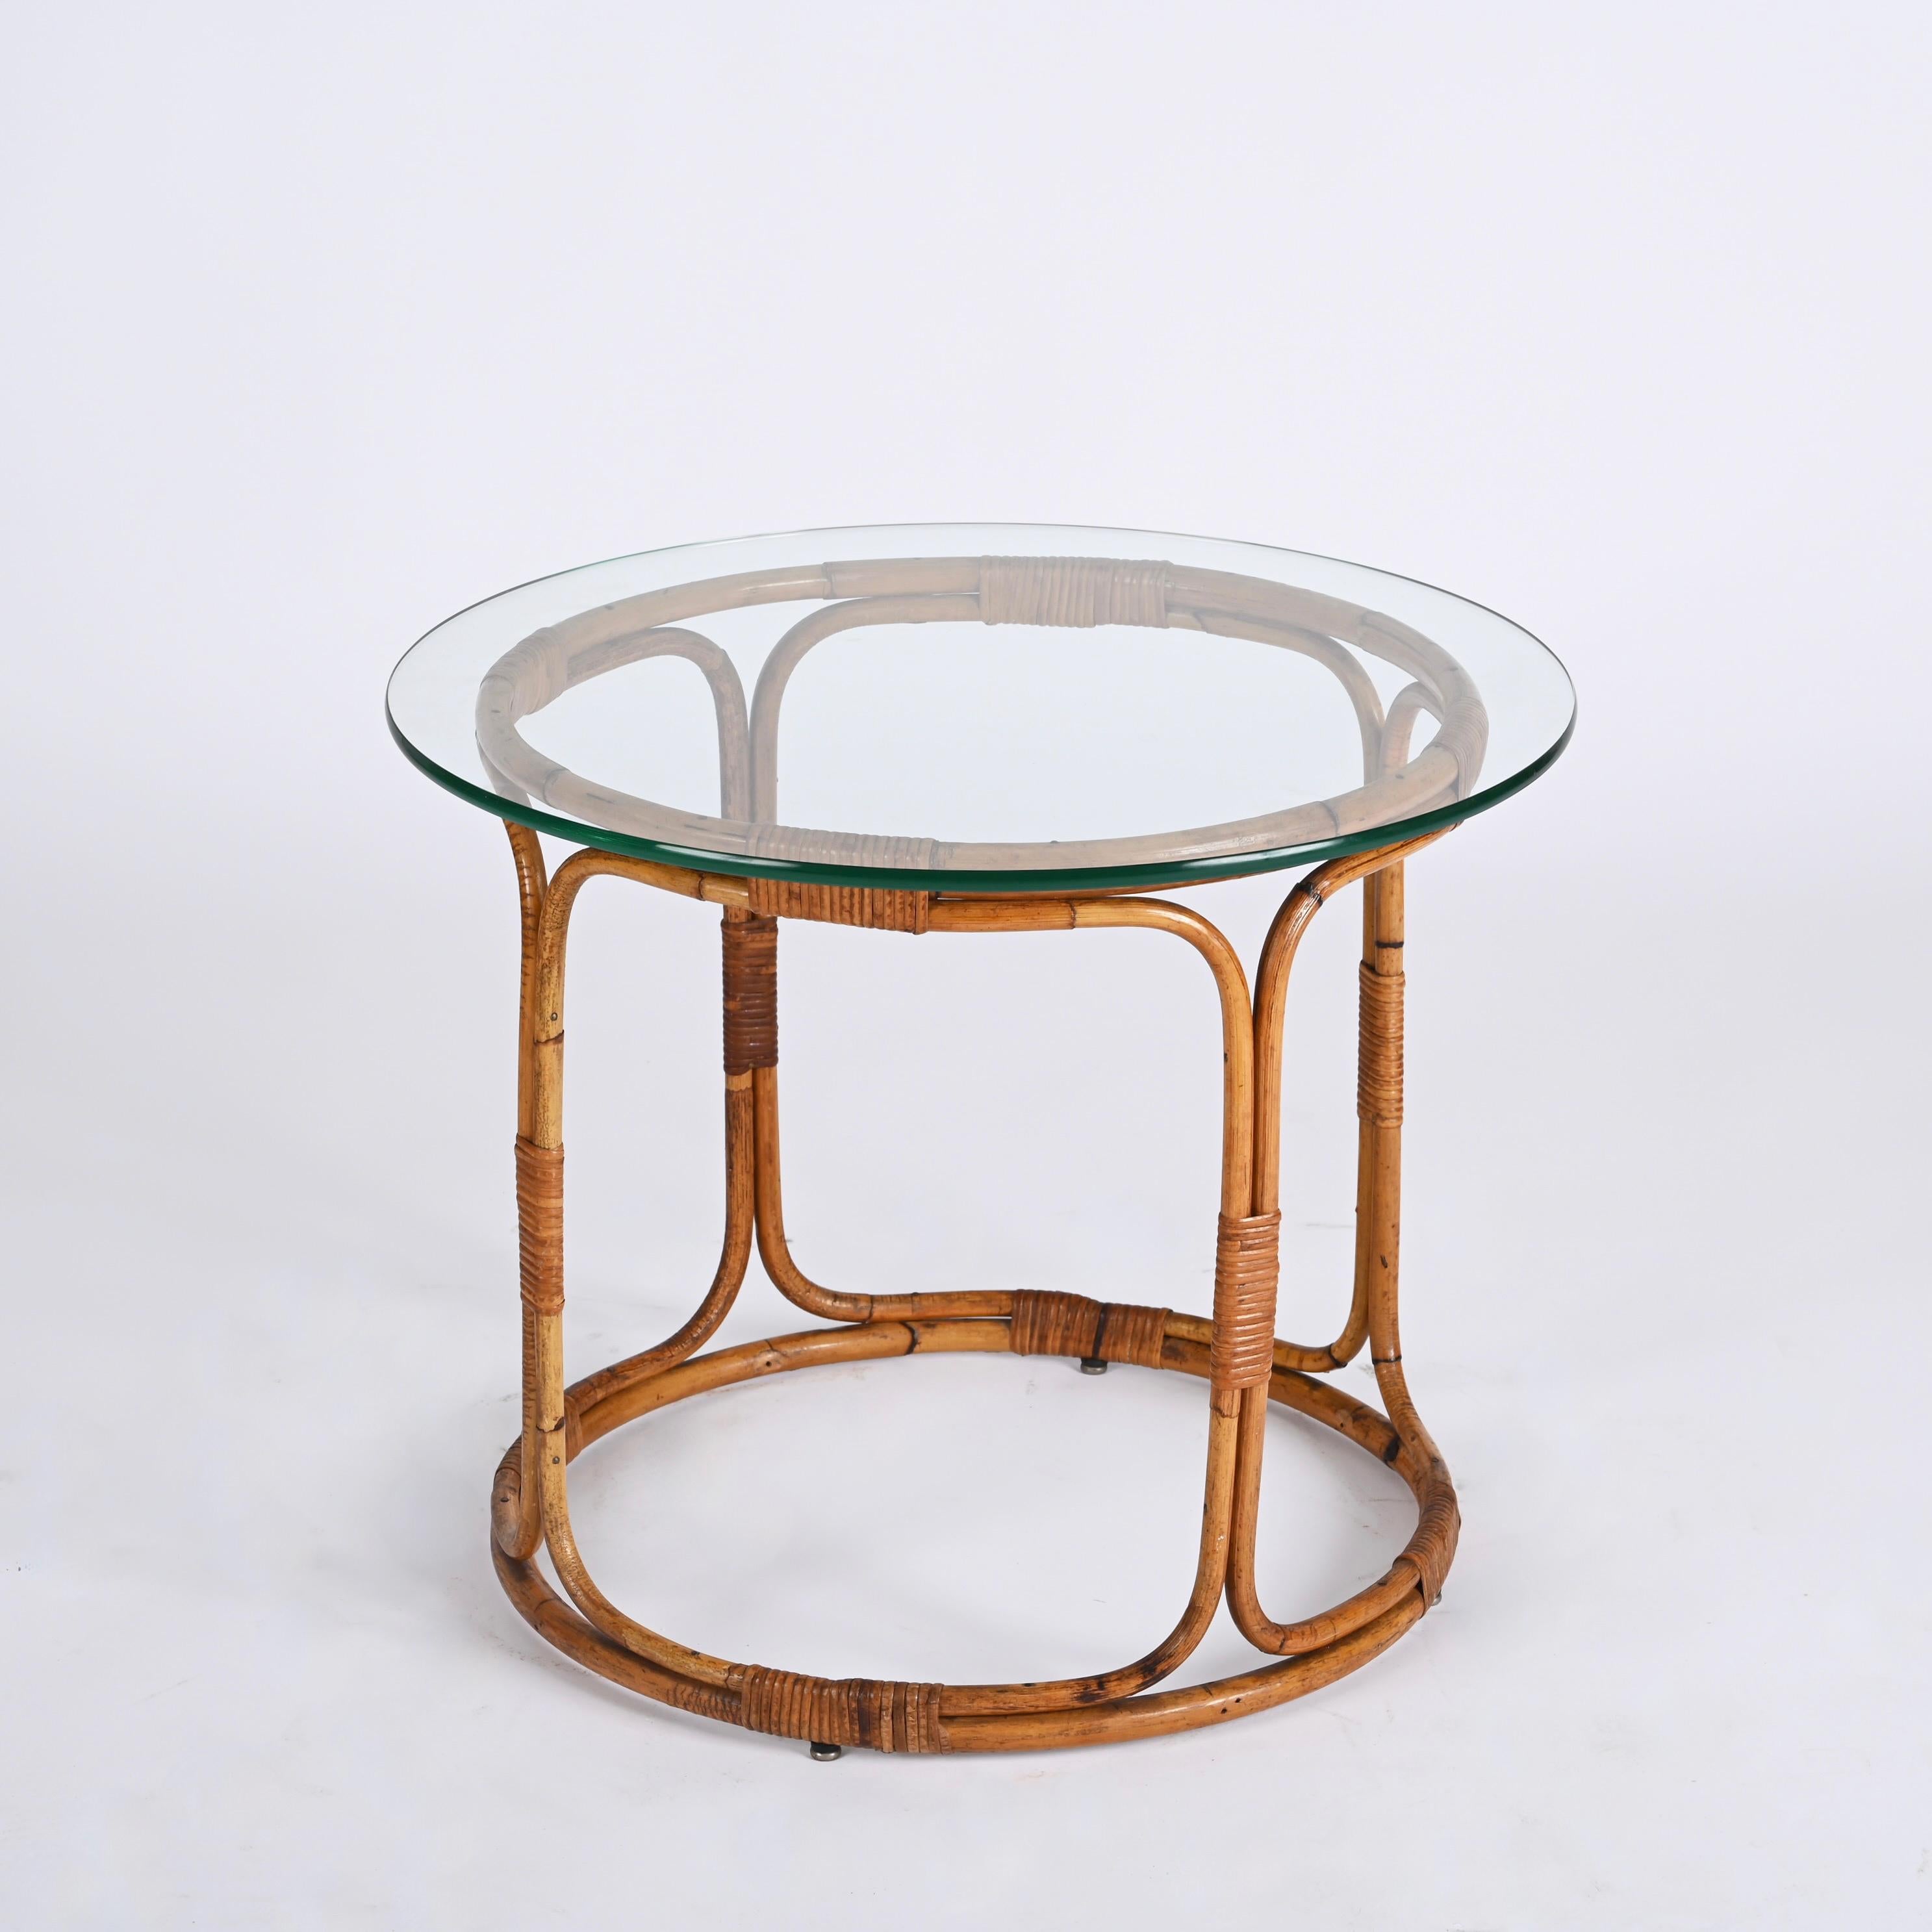 Mid-20th Century Midcentury Round Rattan, Bamboo Italian Coffee Table with Glass Shelf, 1960s For Sale